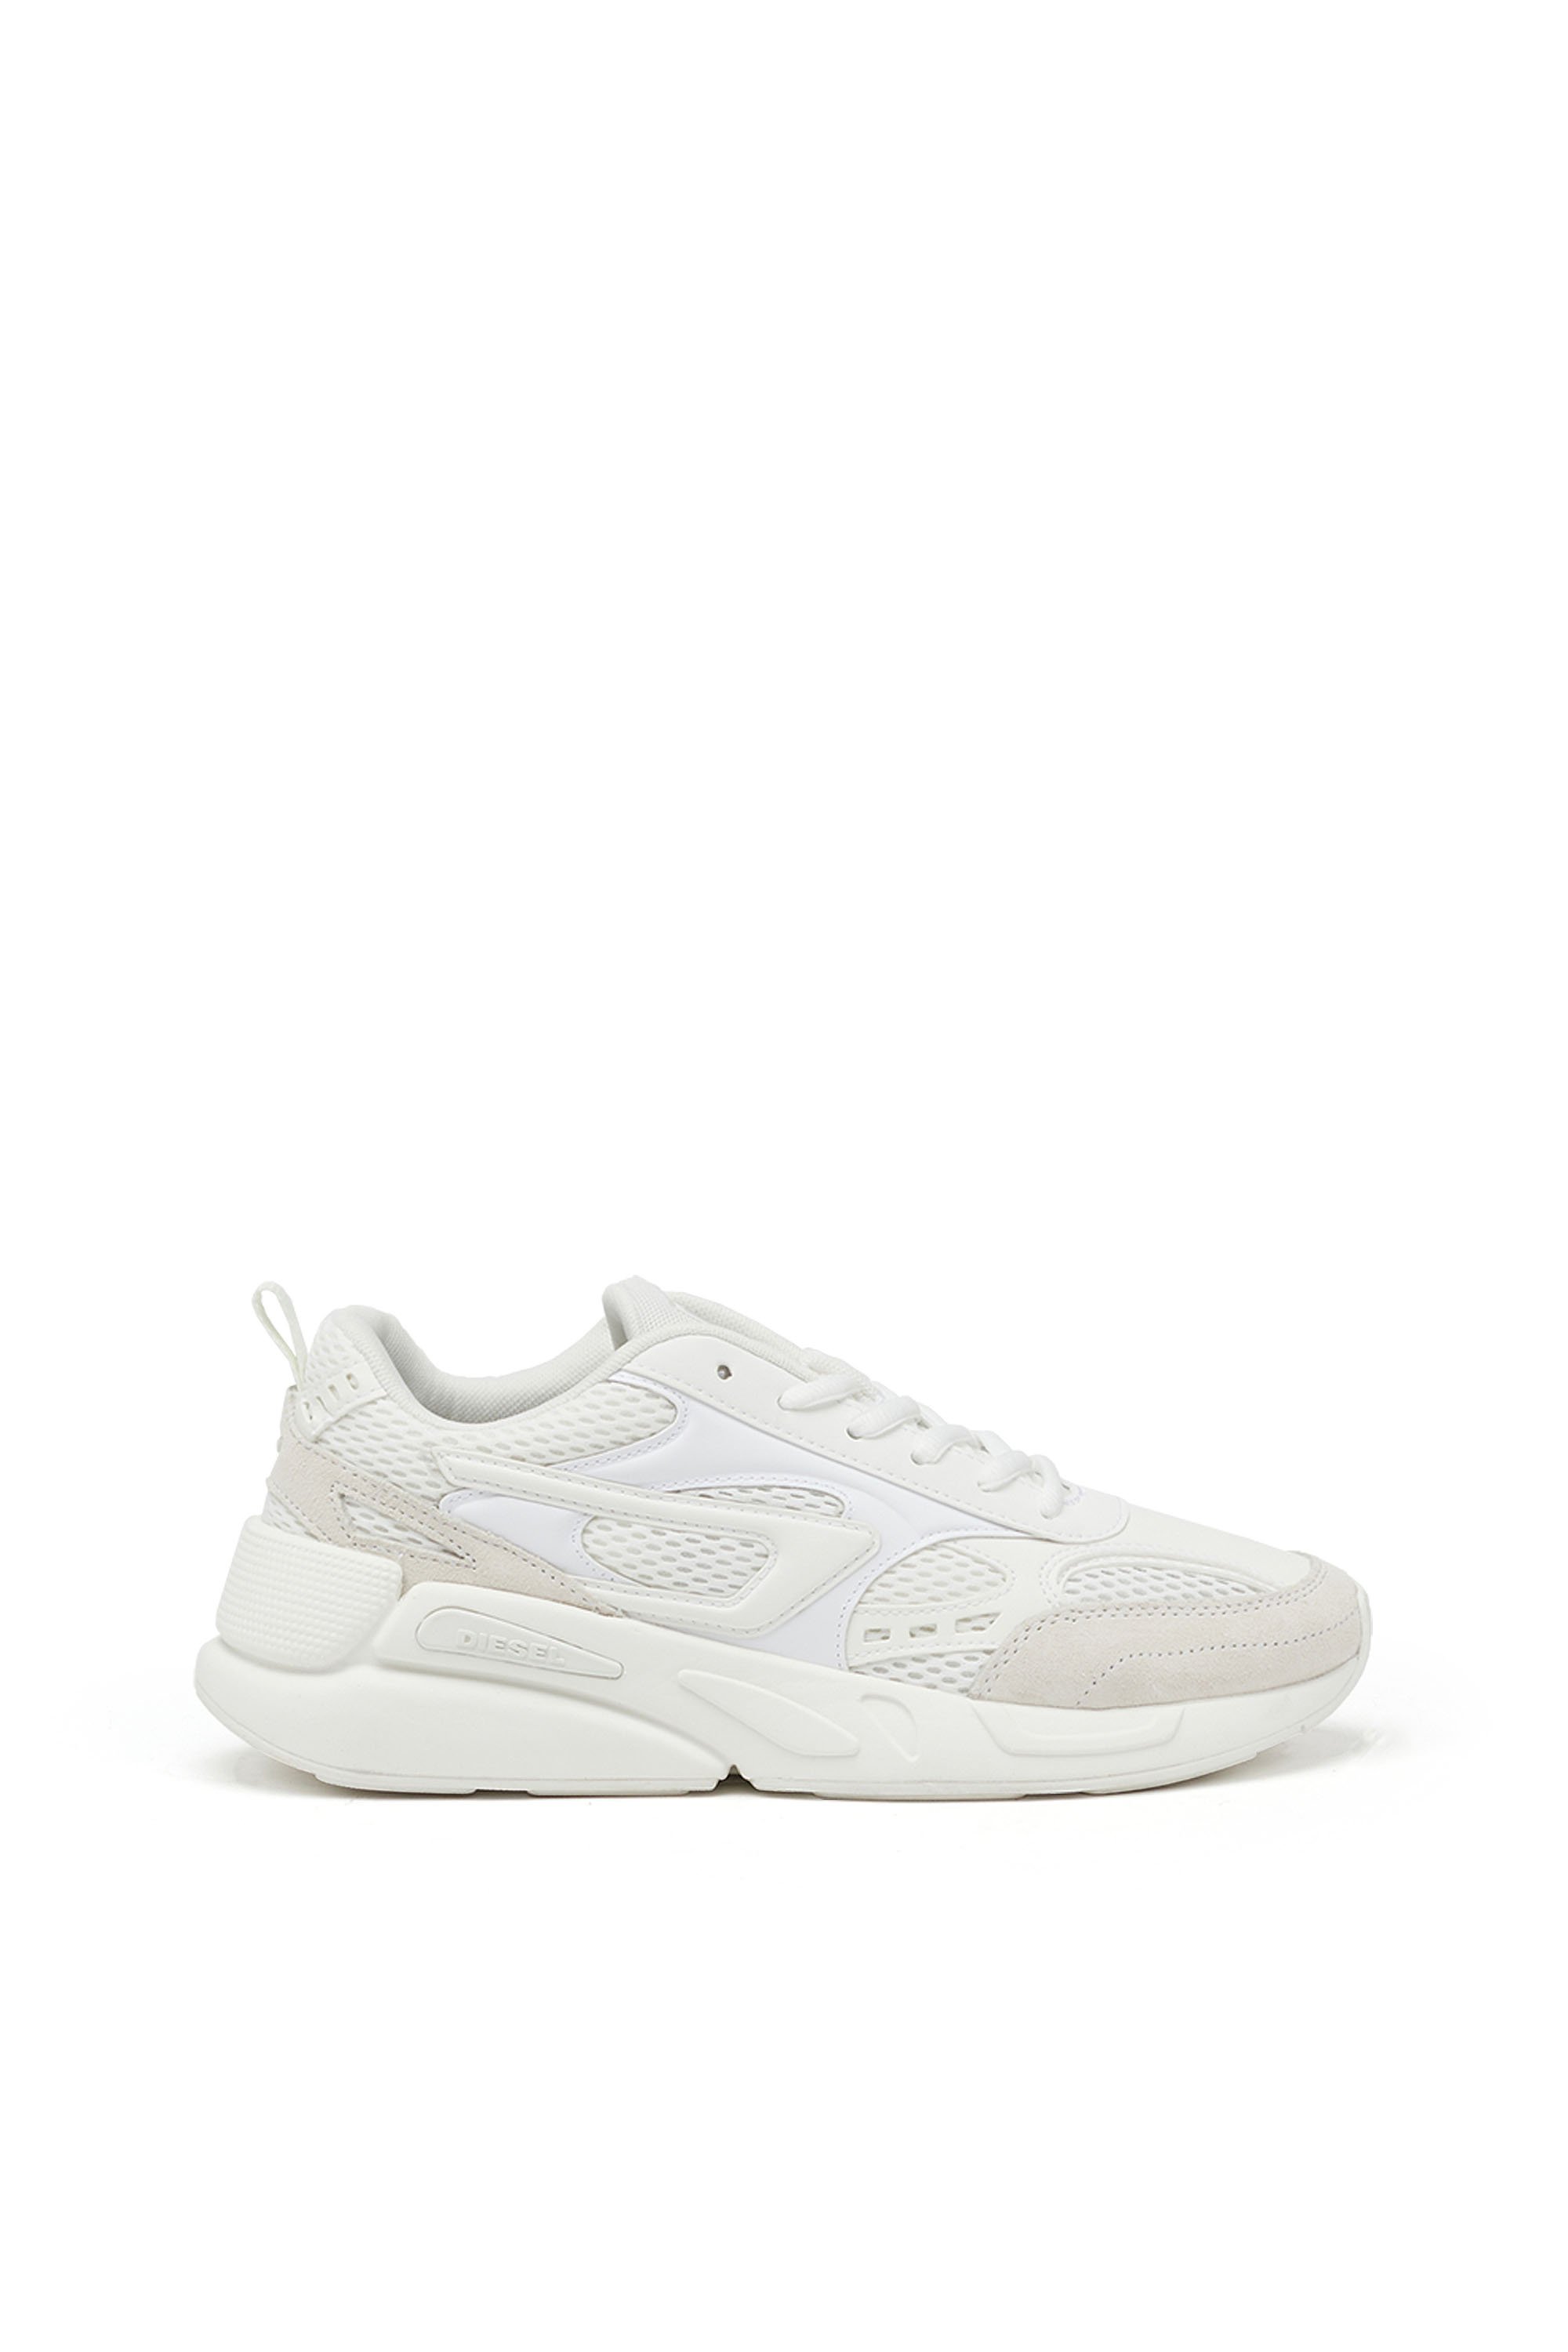 Diesel - S-Serendipity Sport W - Sneakers in mesh and suede - Sneakers - Woman - White